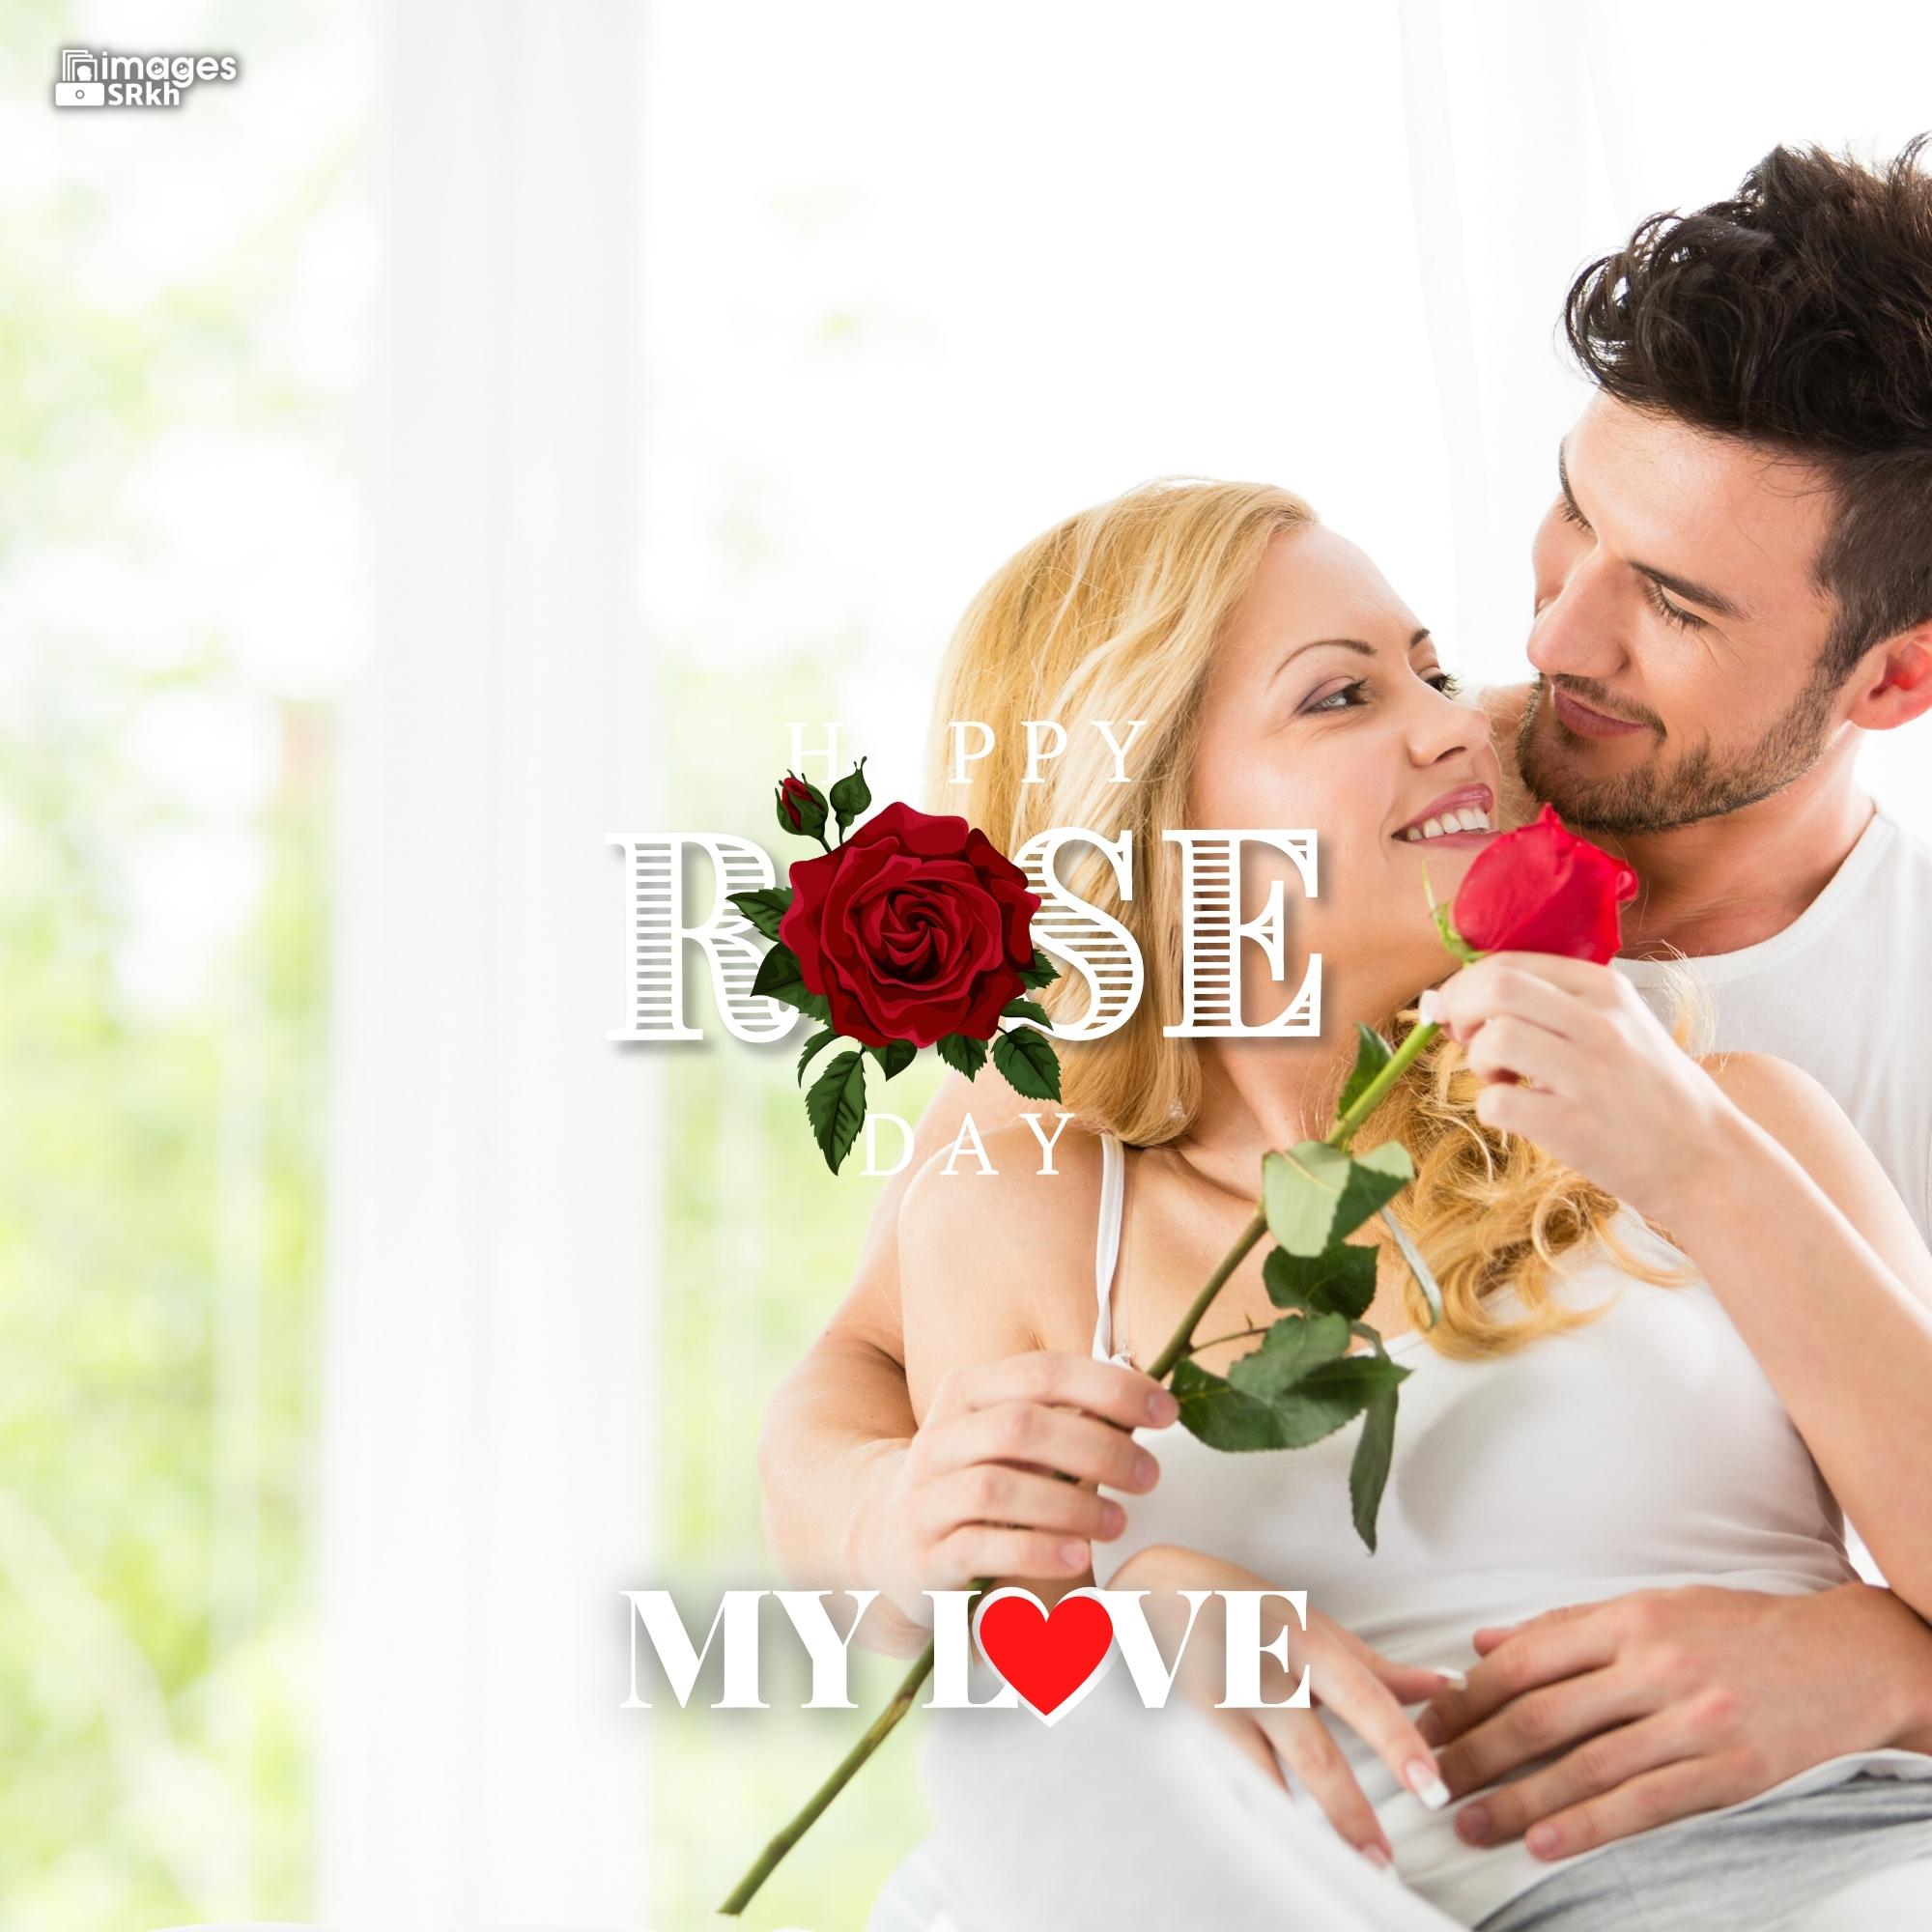 Happy Rose Day My Love (37) | HD IMAGES